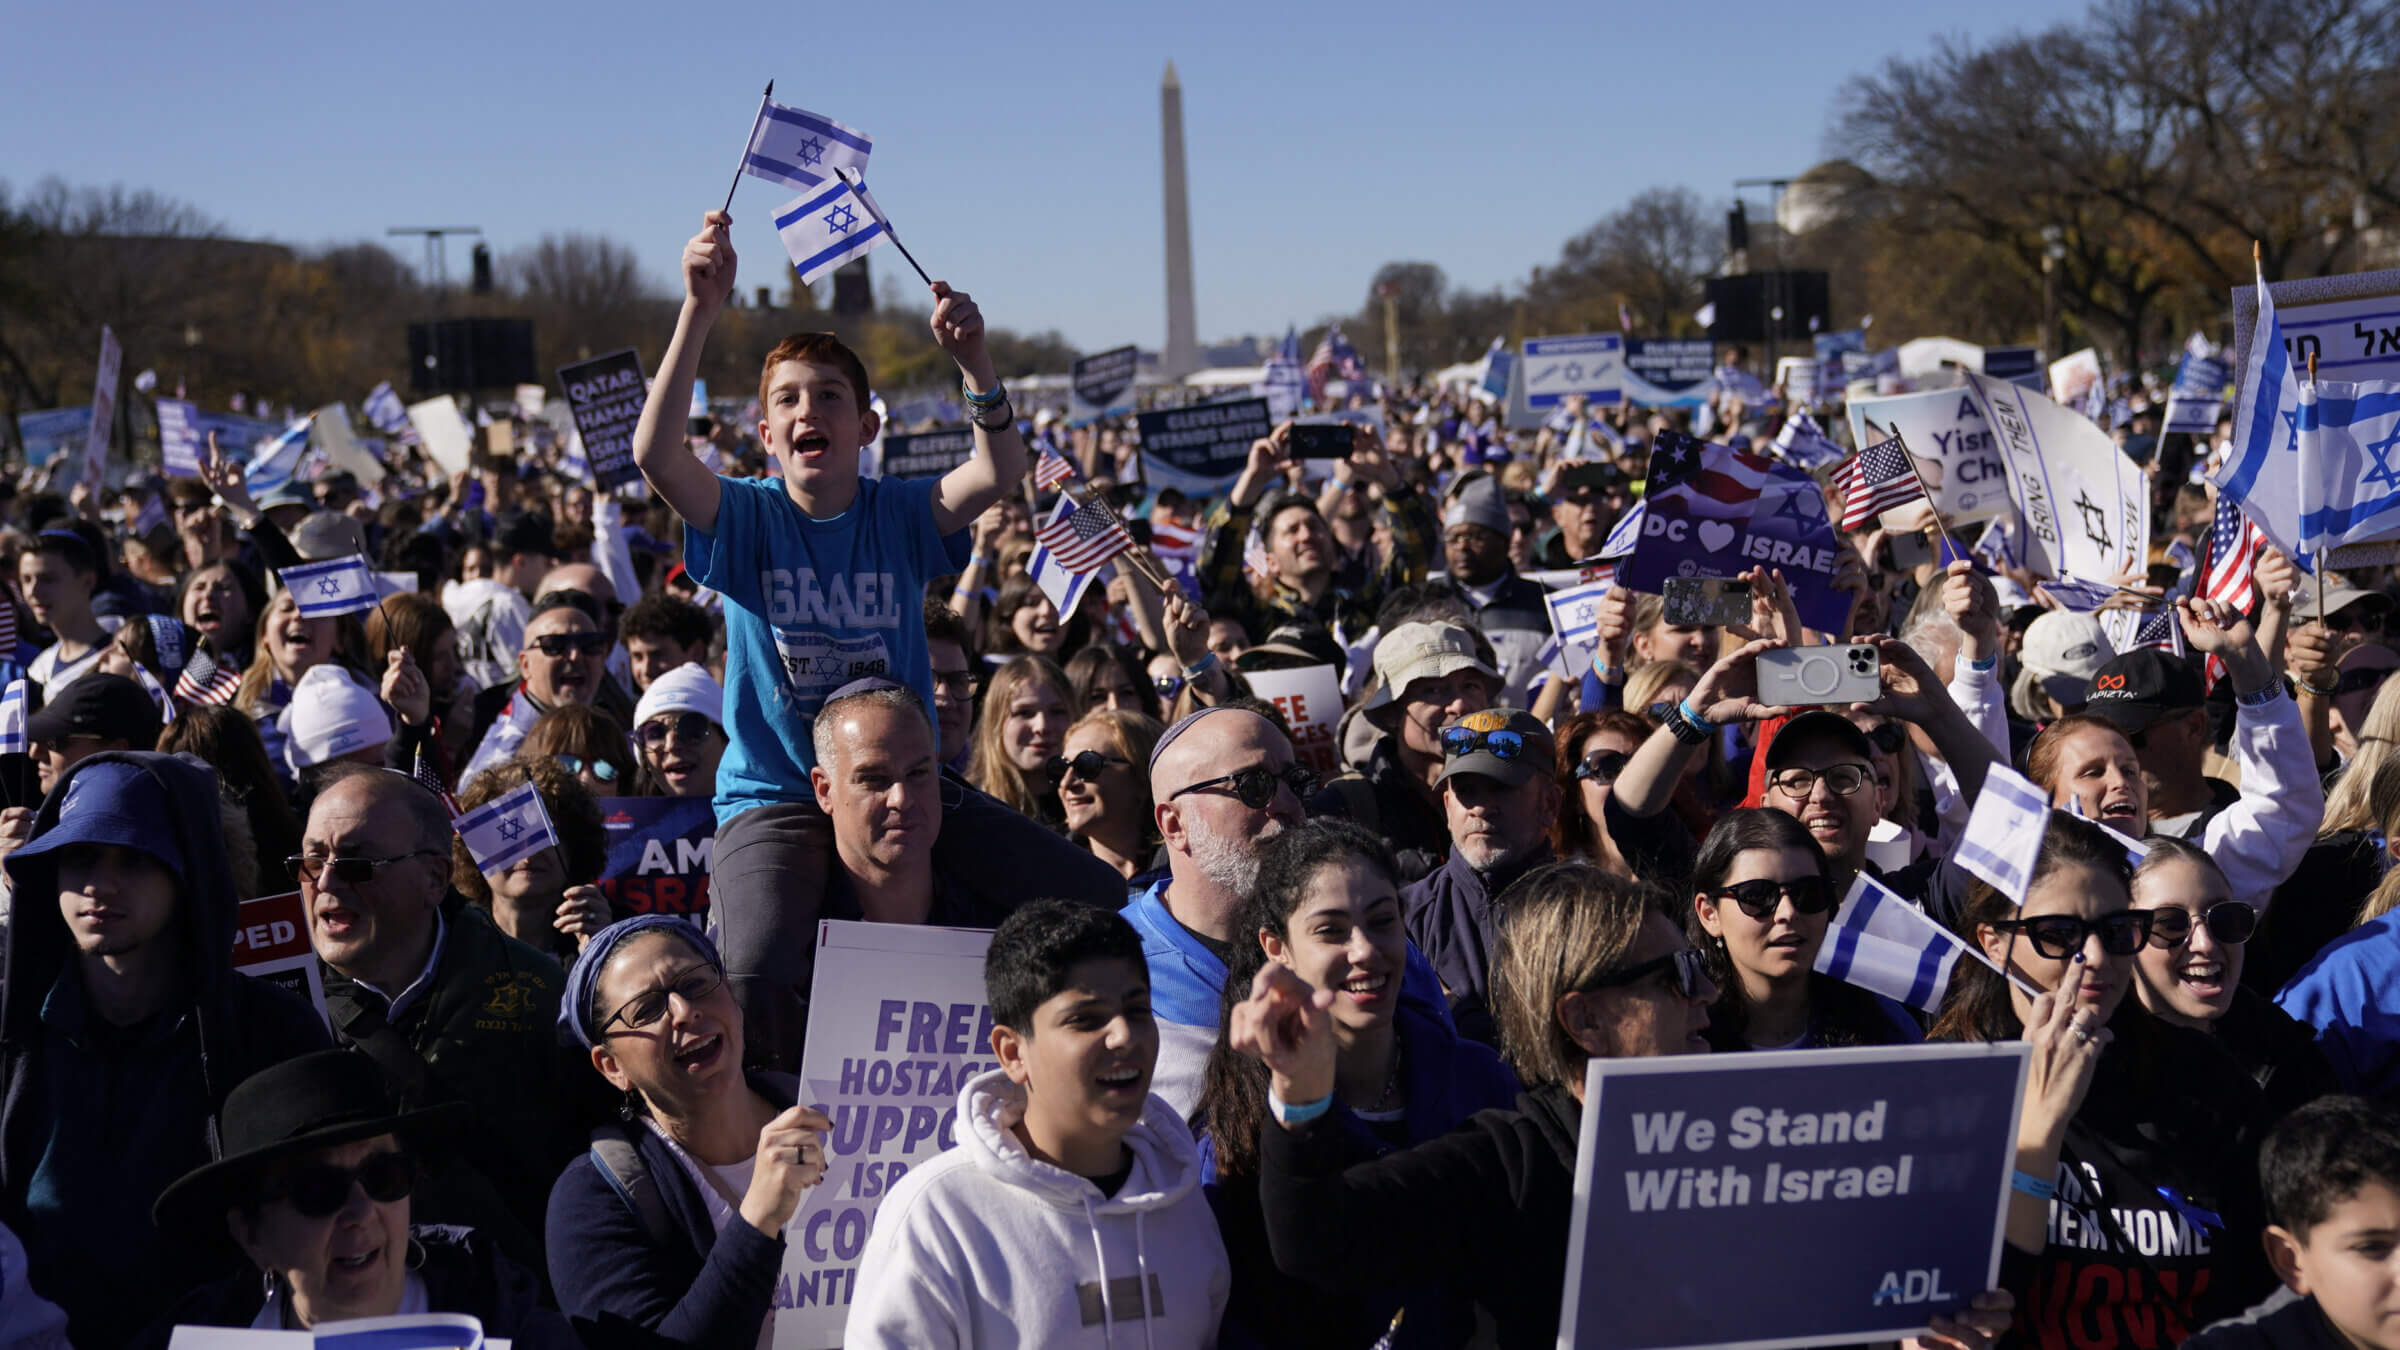 Demonstrators in support of Israel gather to denounce antisemitism and call for the release of Israeli hostages on the National Mall in Washington, D.C., Nov. 14.